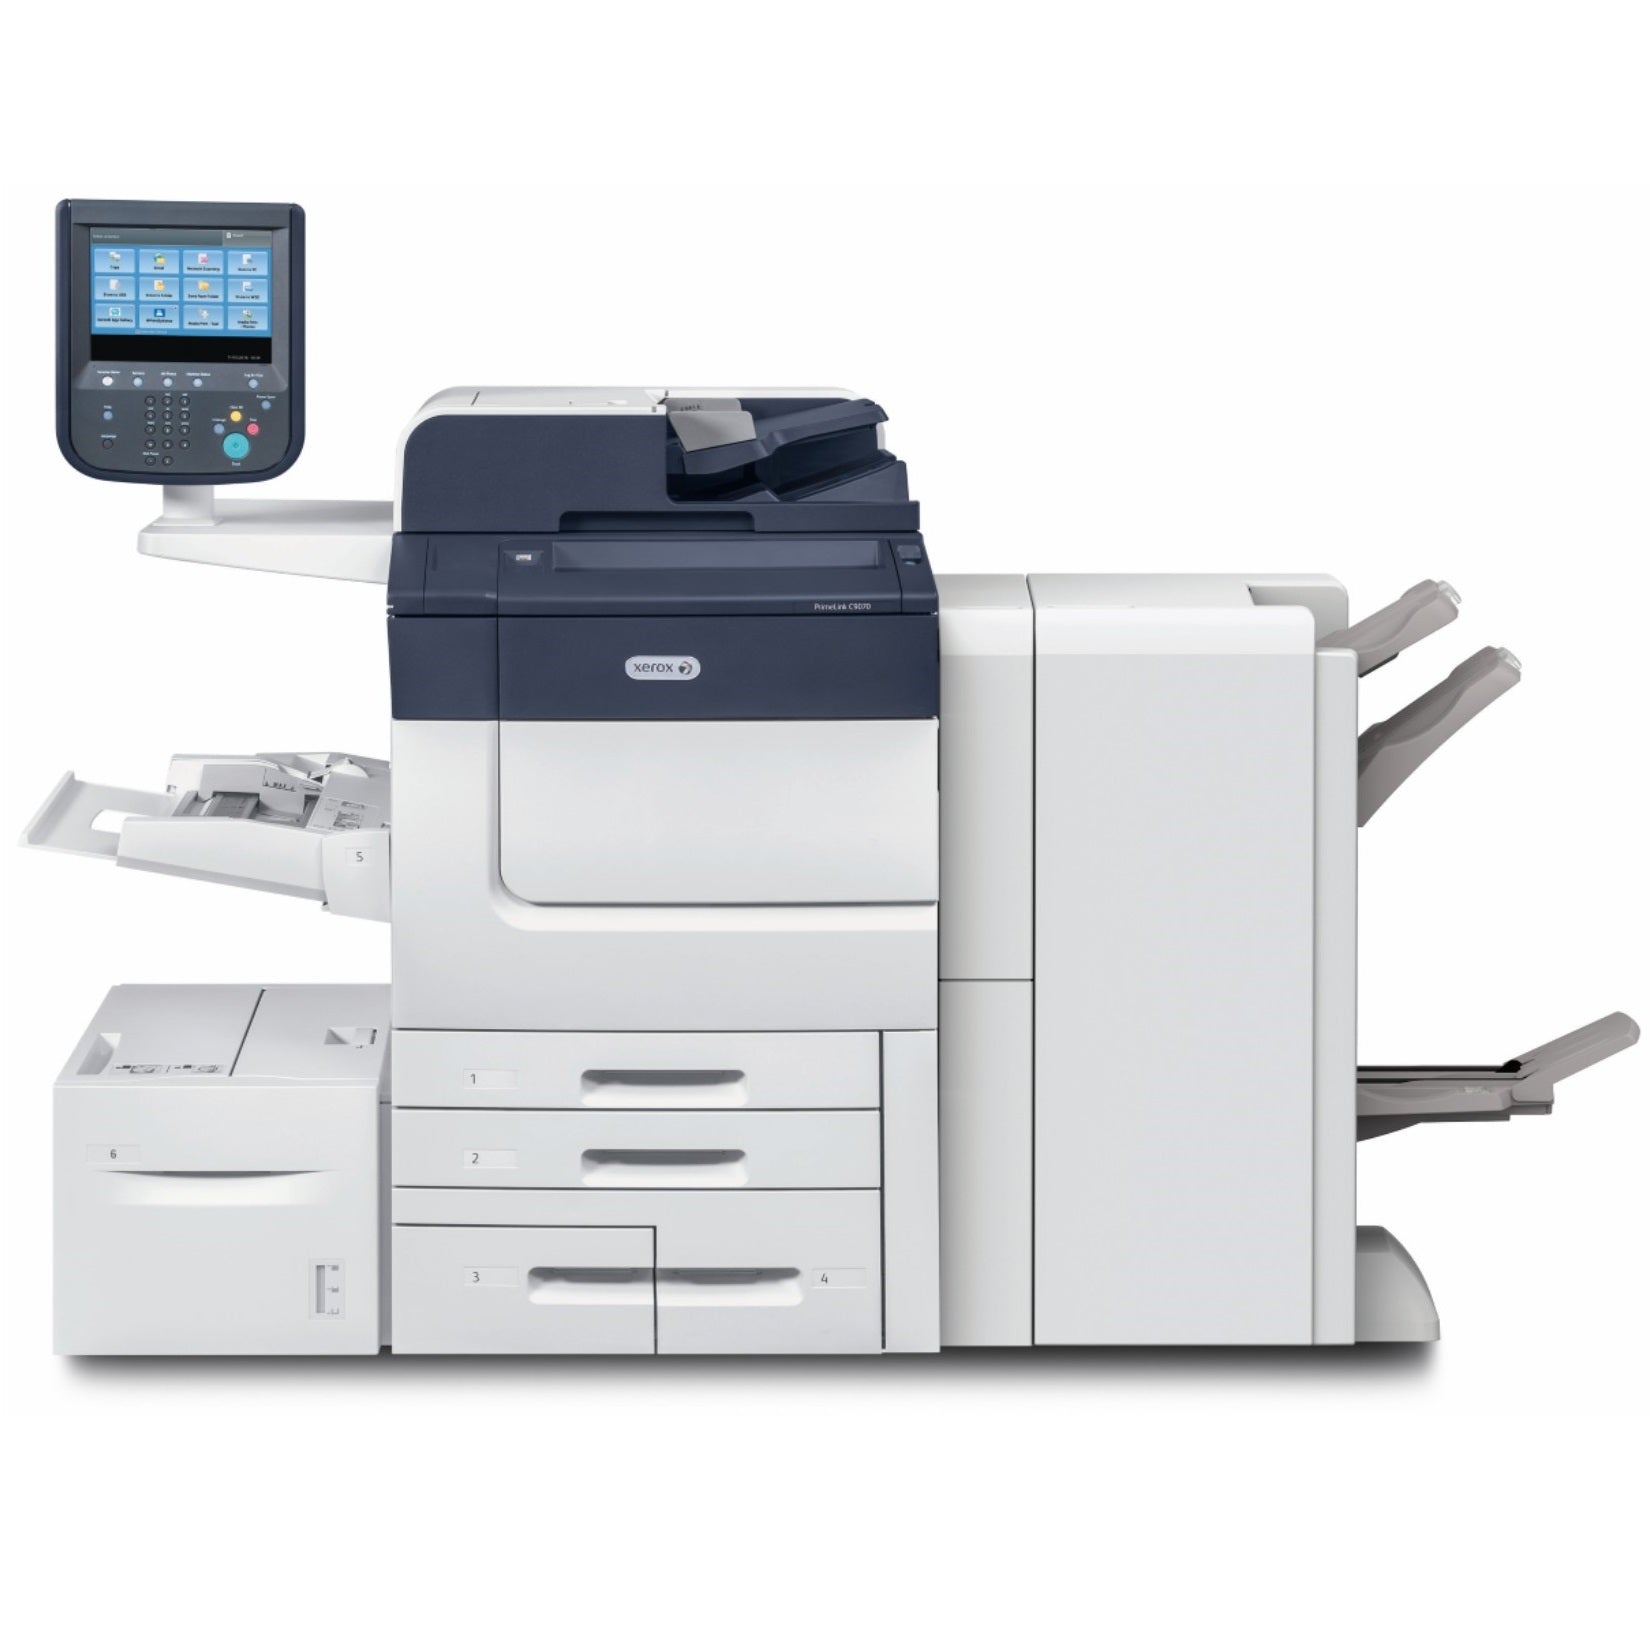 15 Powerful Ways To Improve Your Xerox PrimeLink C9070 Color Laser Multifunction Printer, Can Increase Productivity For Your Business Or Office - Xerox MFP Color Laser Printer For Sale By Absolute Toner In Canada